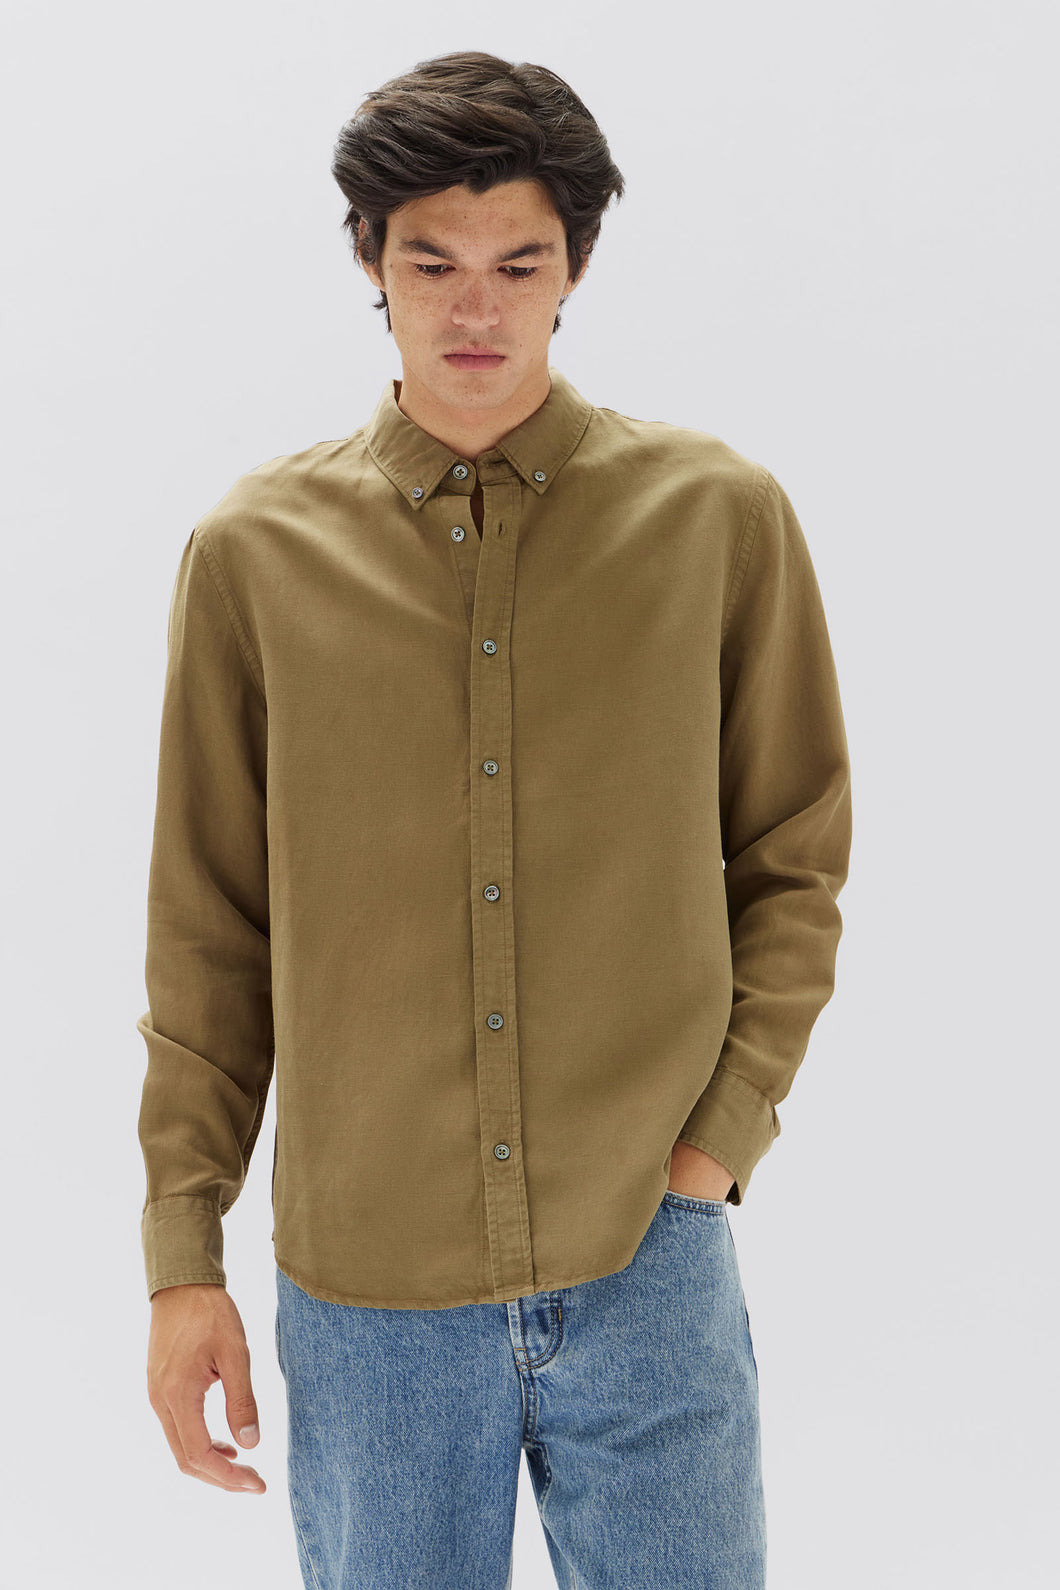 Rosco Long Sleeve Shirt - Pea-ASSEMBLY LABEL-P&K The General Store